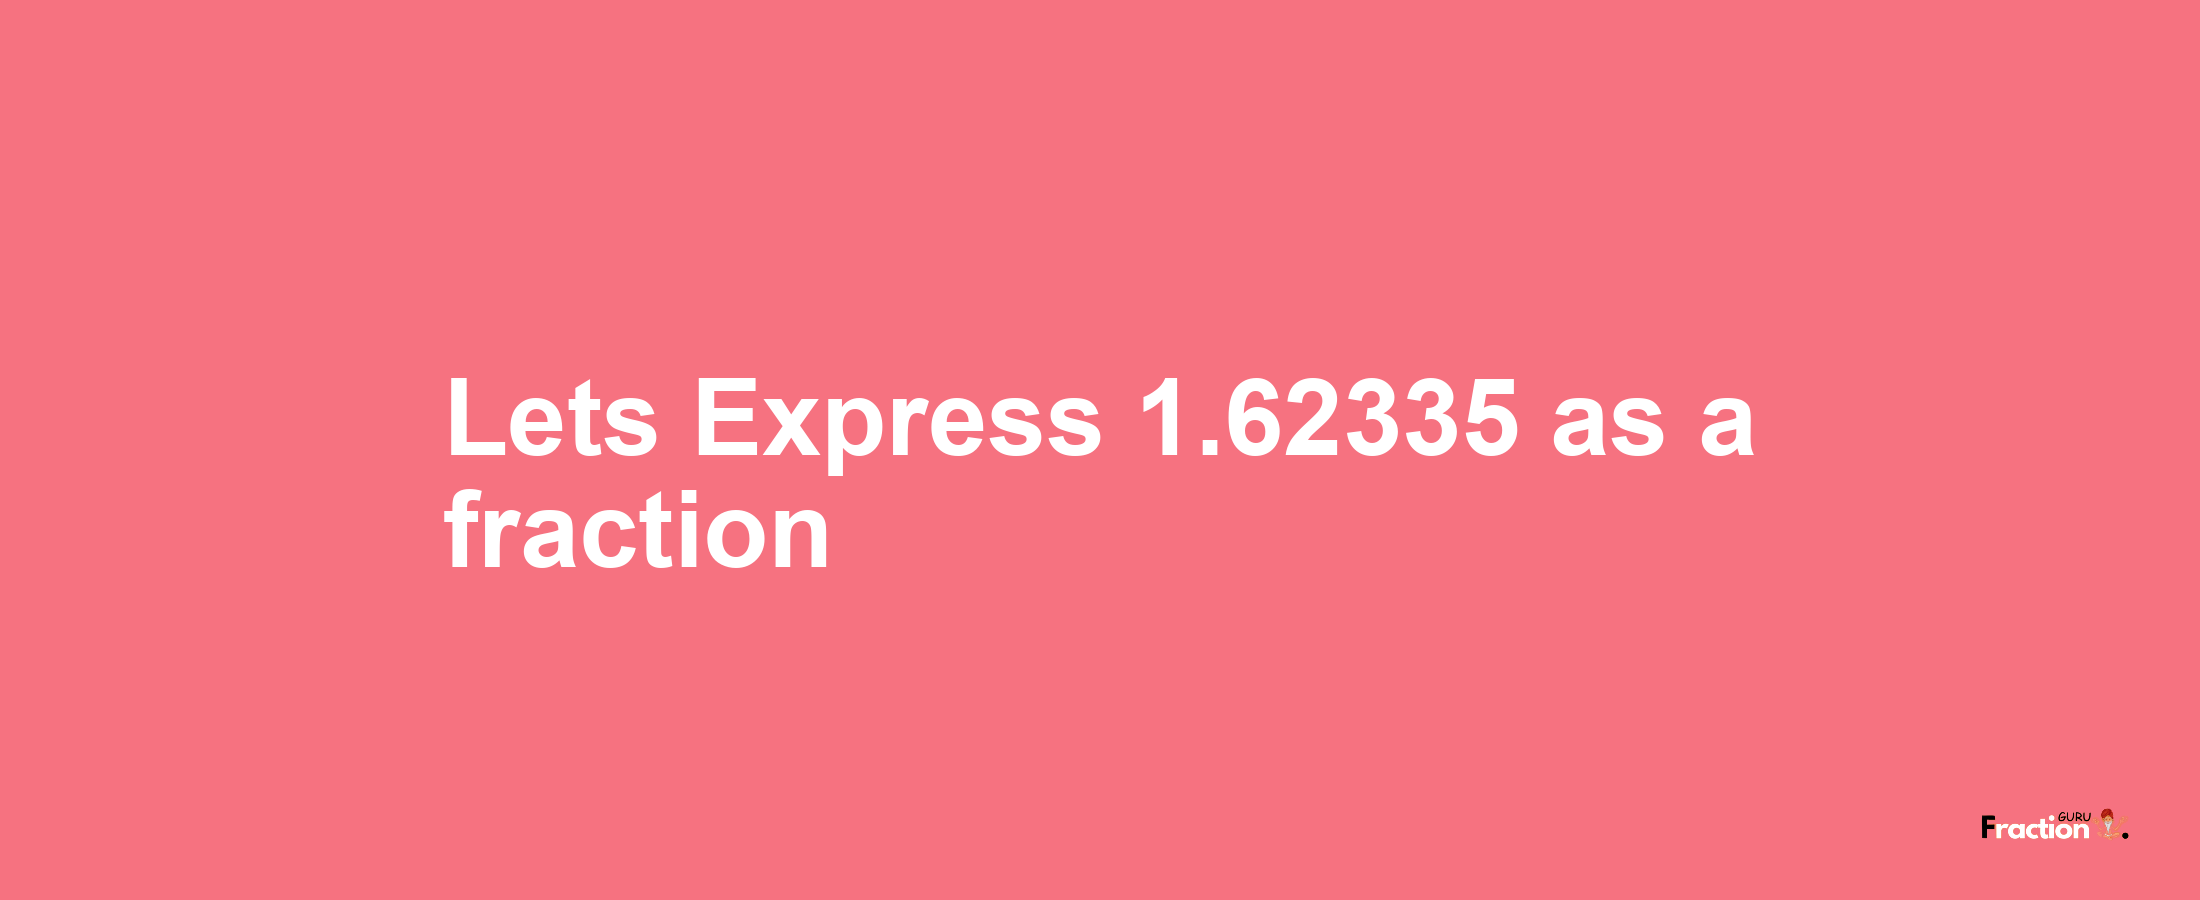 Lets Express 1.62335 as afraction